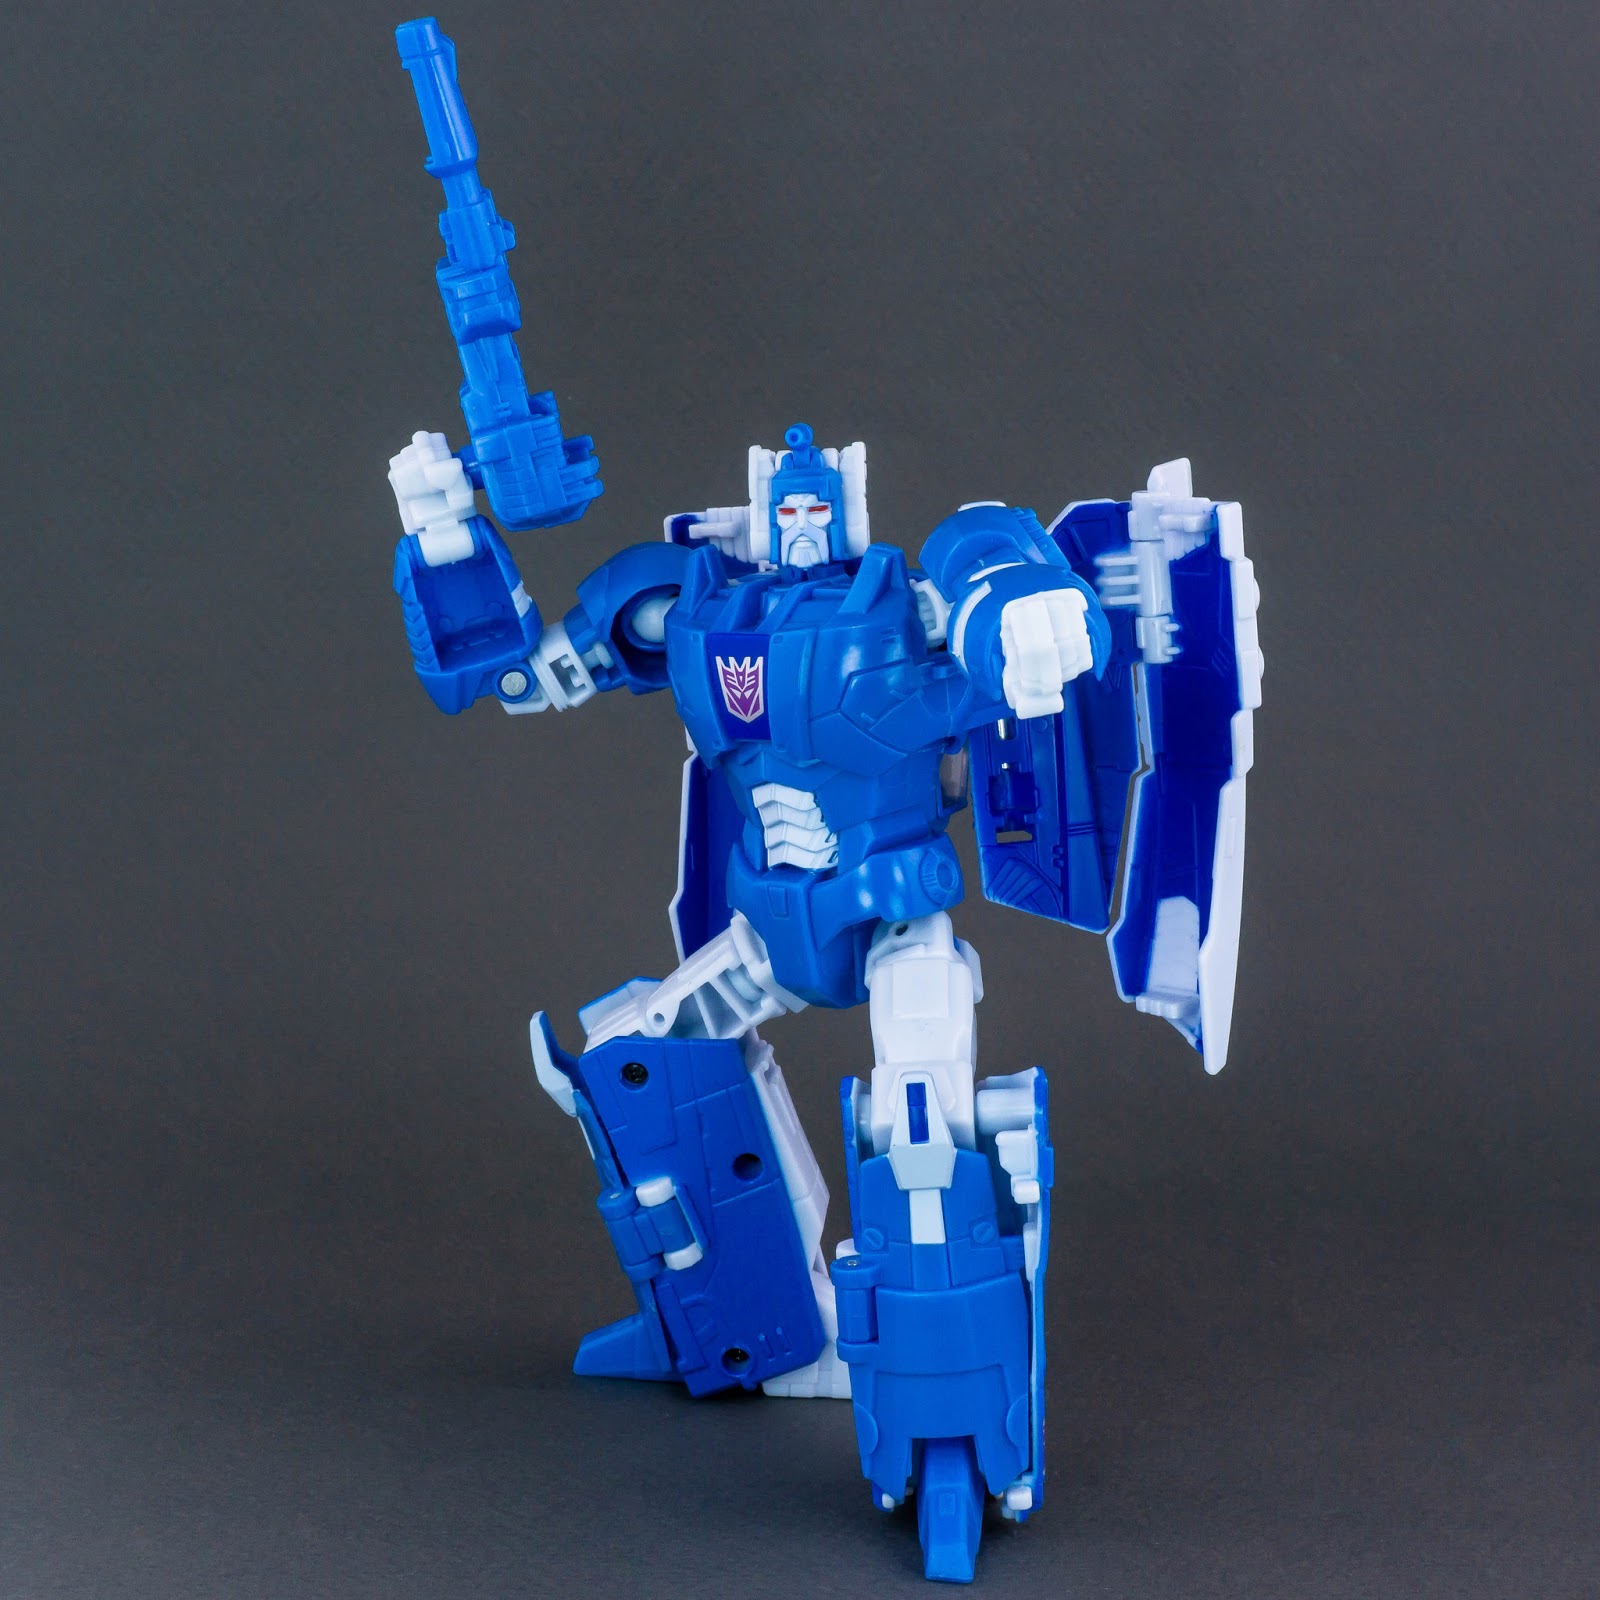 Transformers Legends (Japanese Release of Titans Return) Scourge robot mode